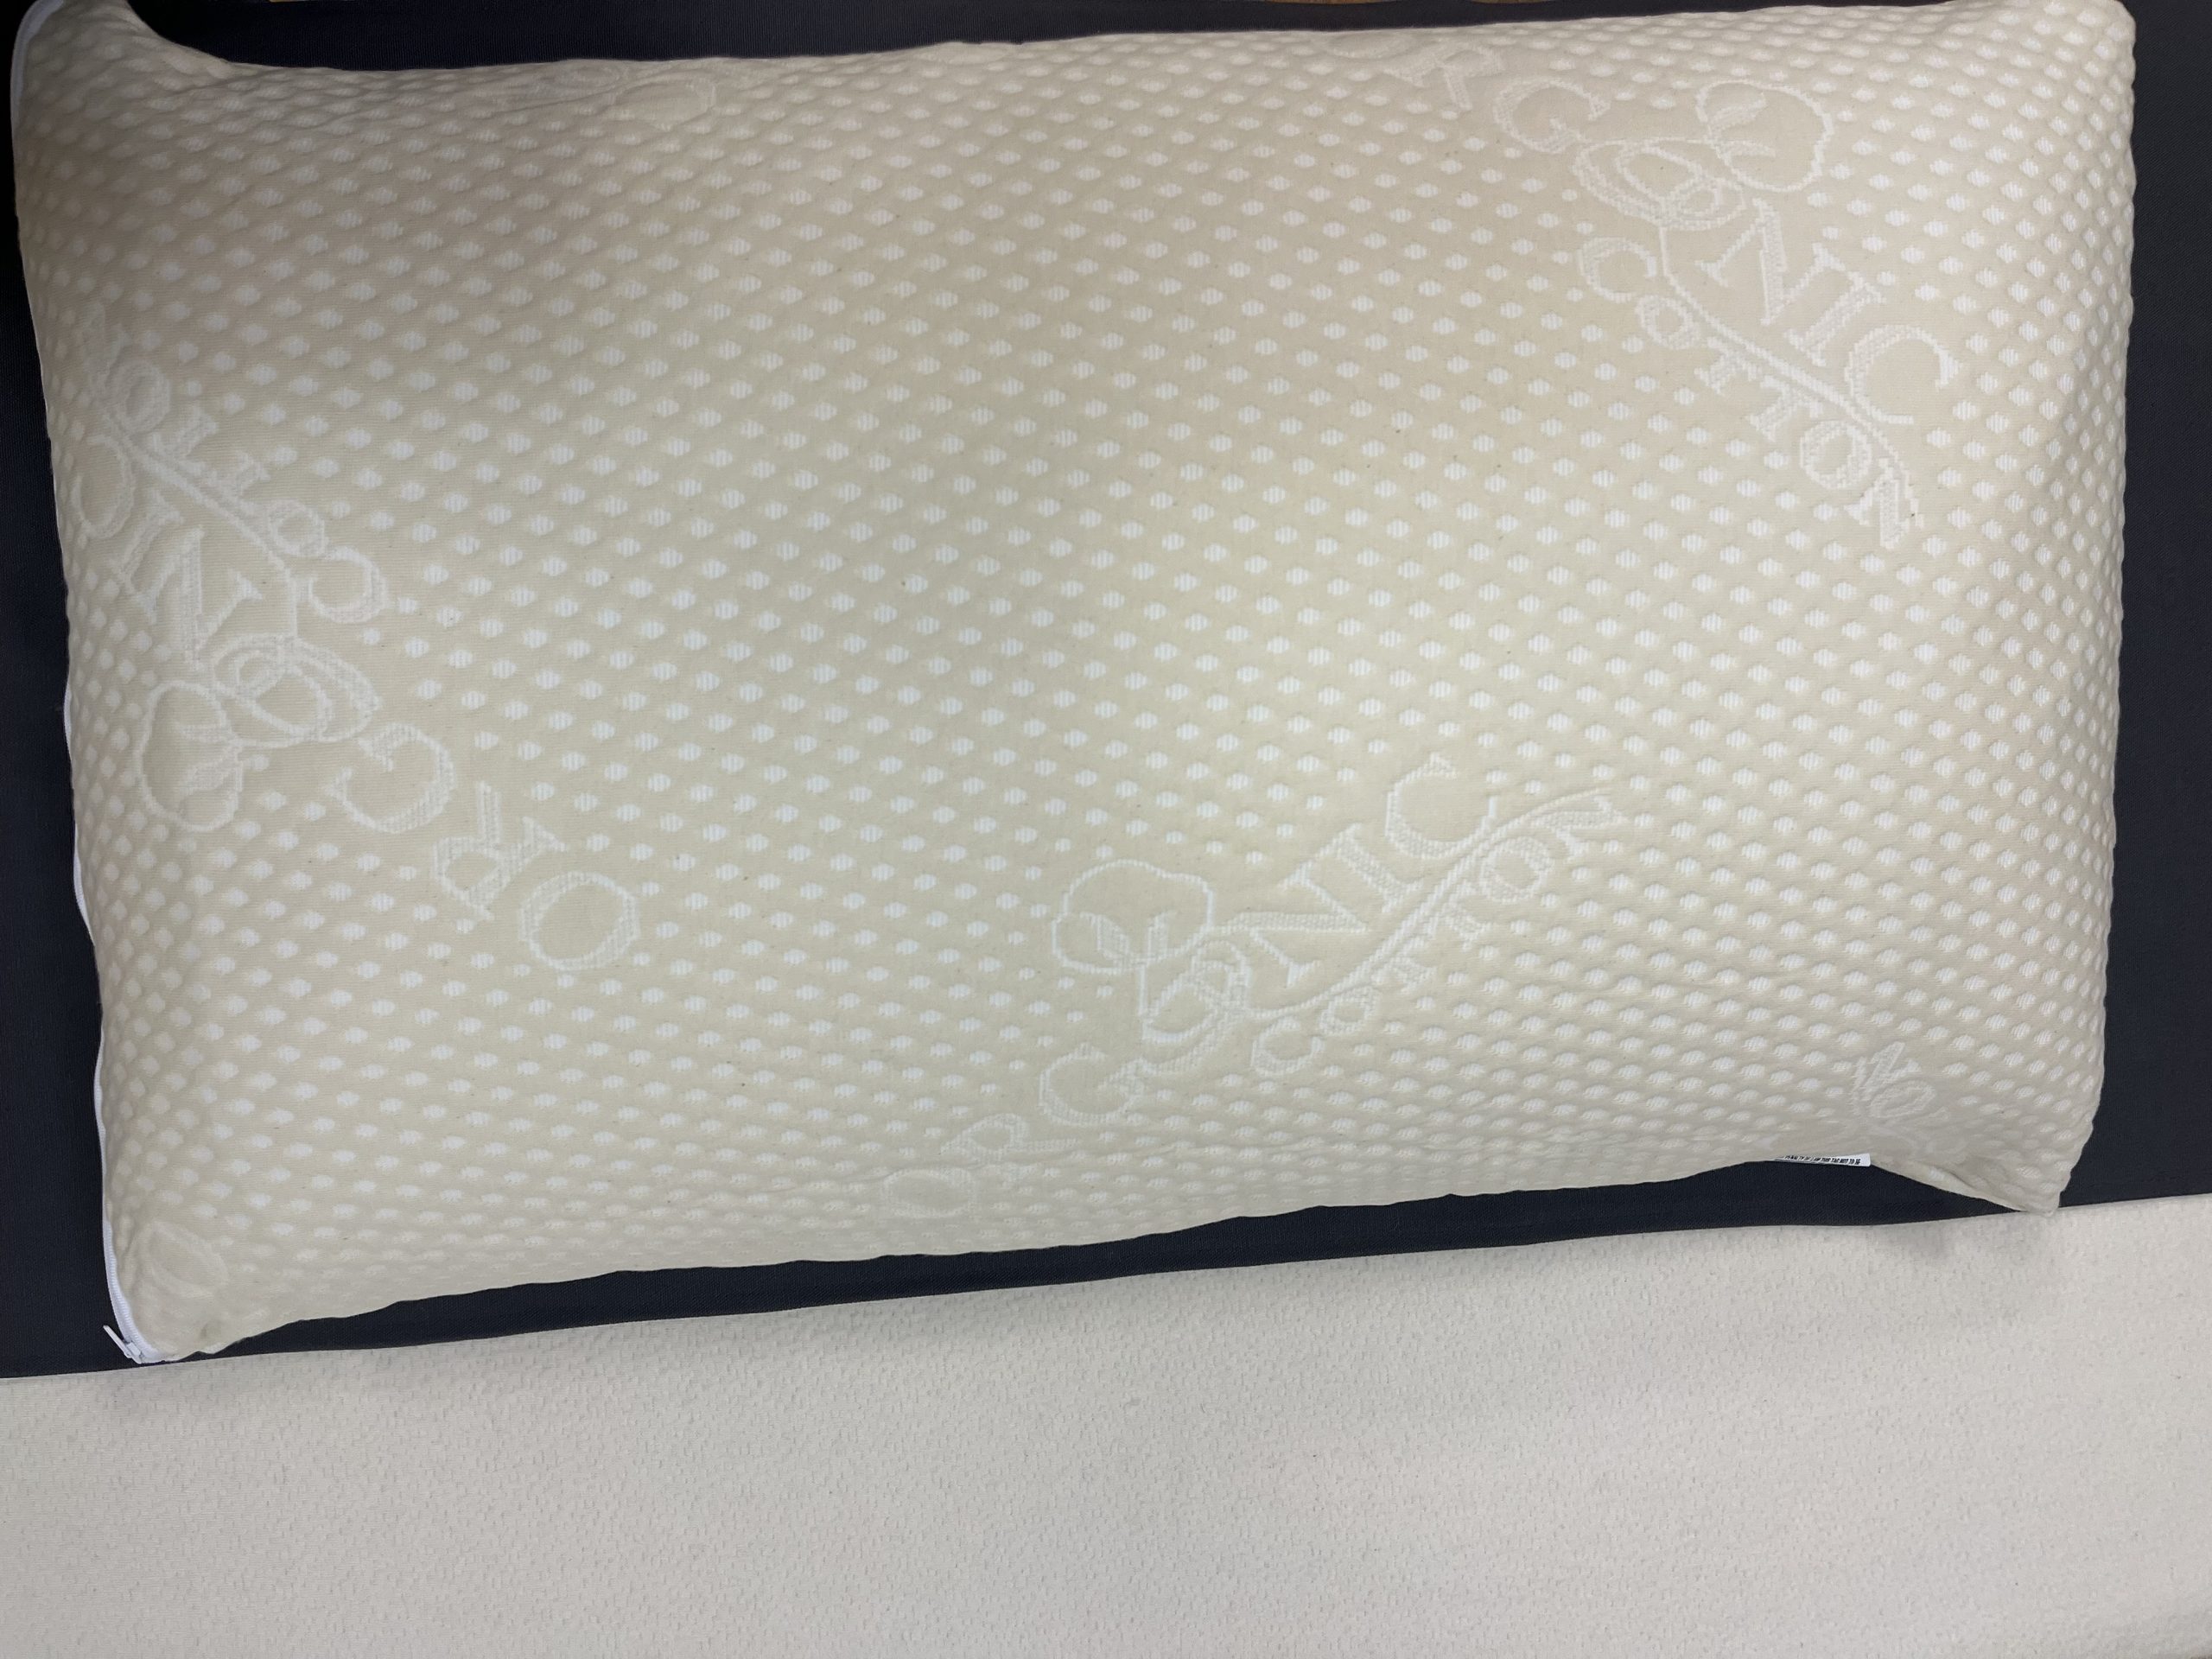 nearby mattress stores rejuvinate pillows